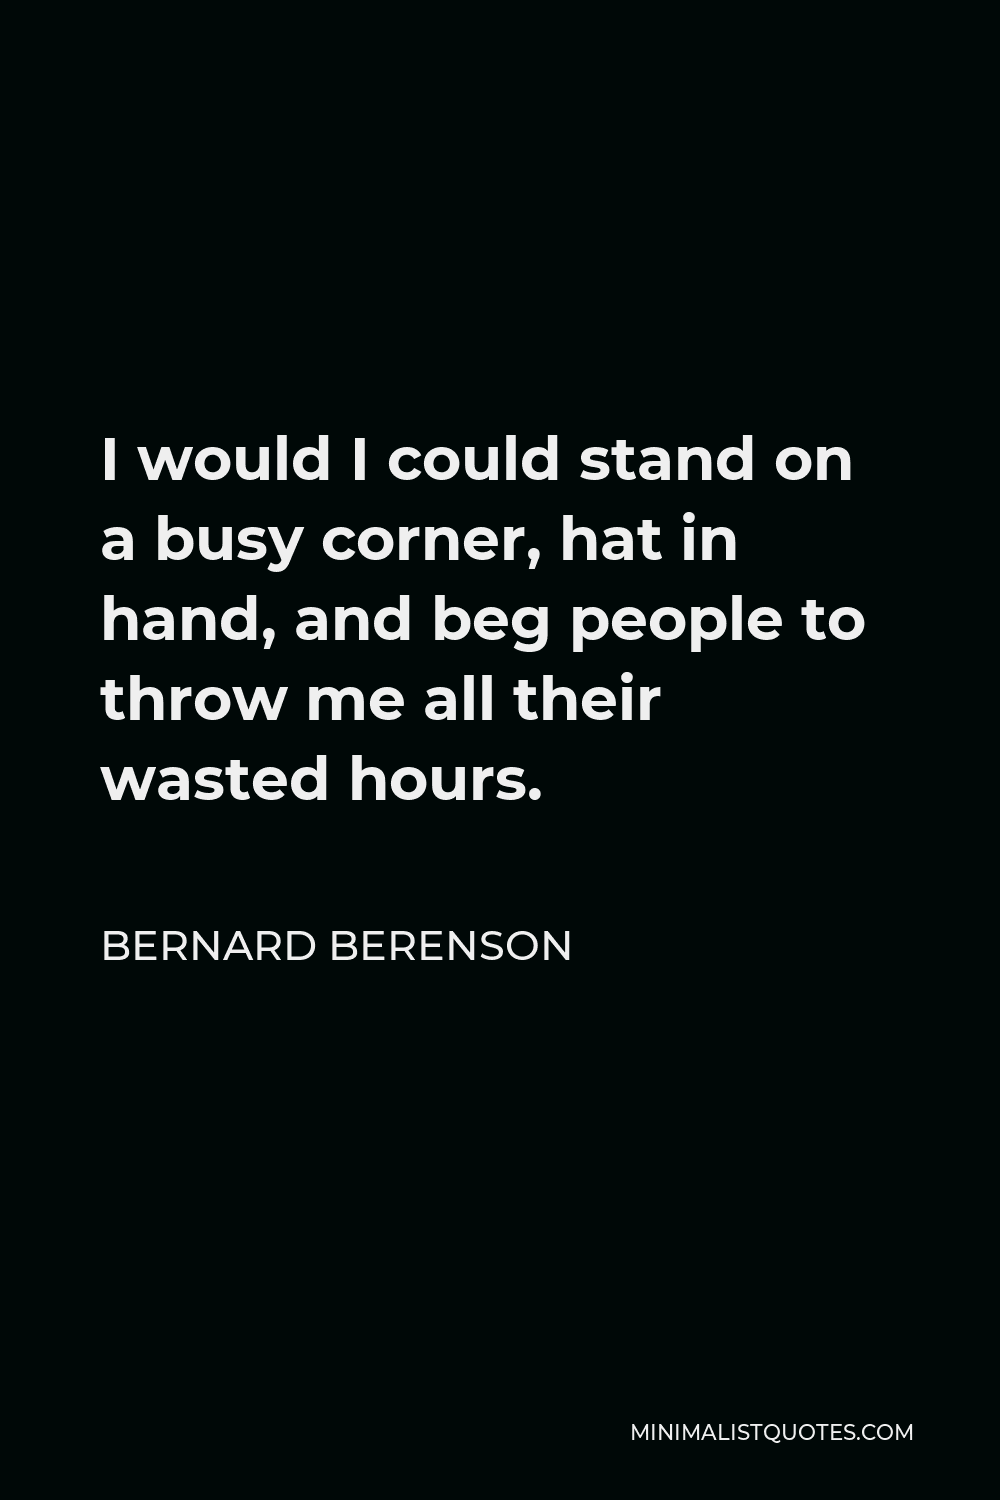 Bernard Berenson Quote - I would I could stand on a busy corner, hat in hand, and beg people to throw me all their wasted hours.